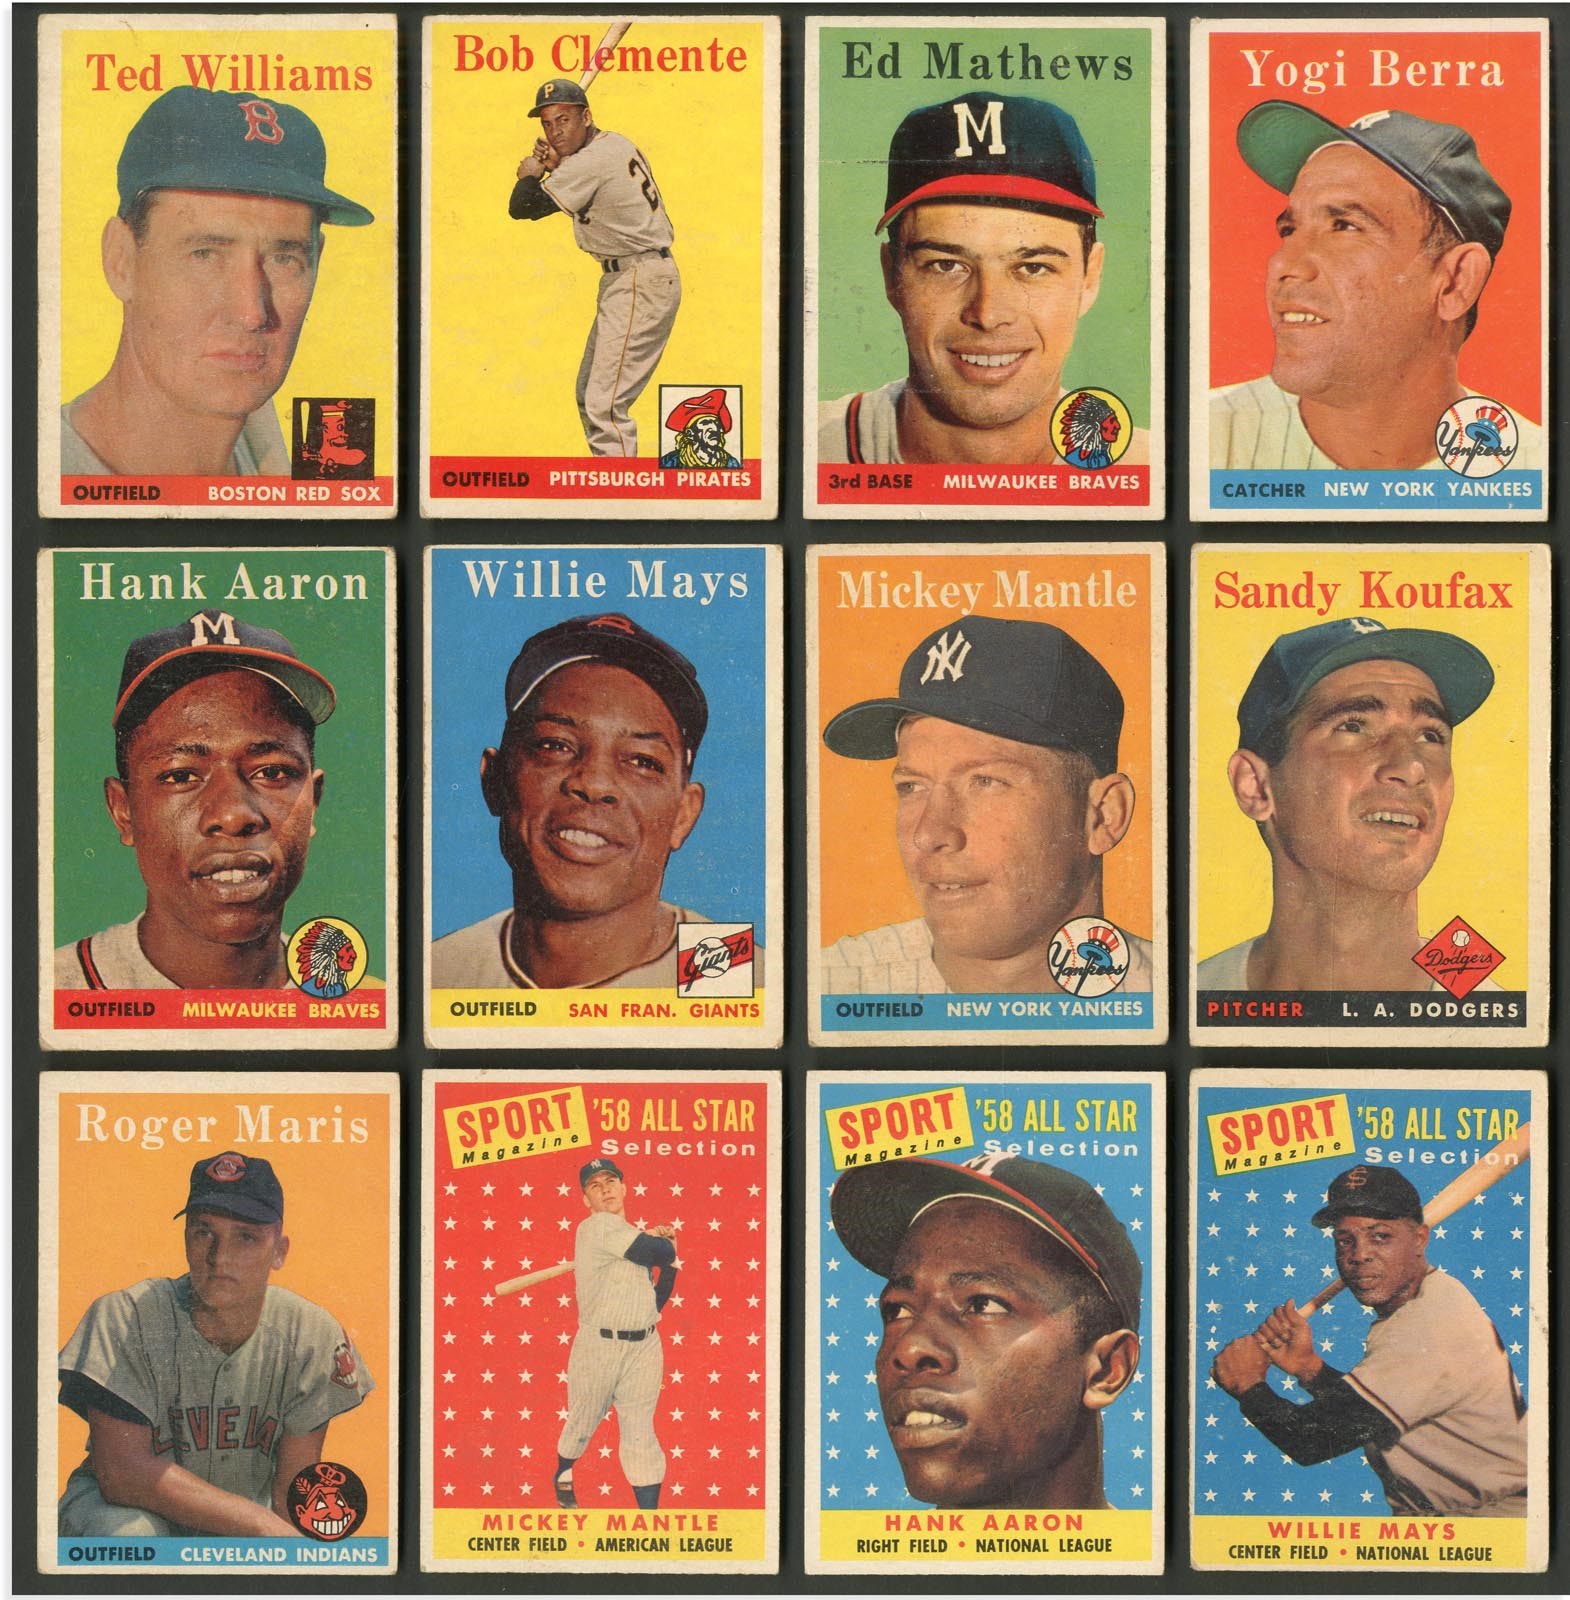 Baseball and Trading Cards - 1958 Topps Near Complete Set with Stars - Mantle, Aaron, Clemente, Williams, Koufax (440+)